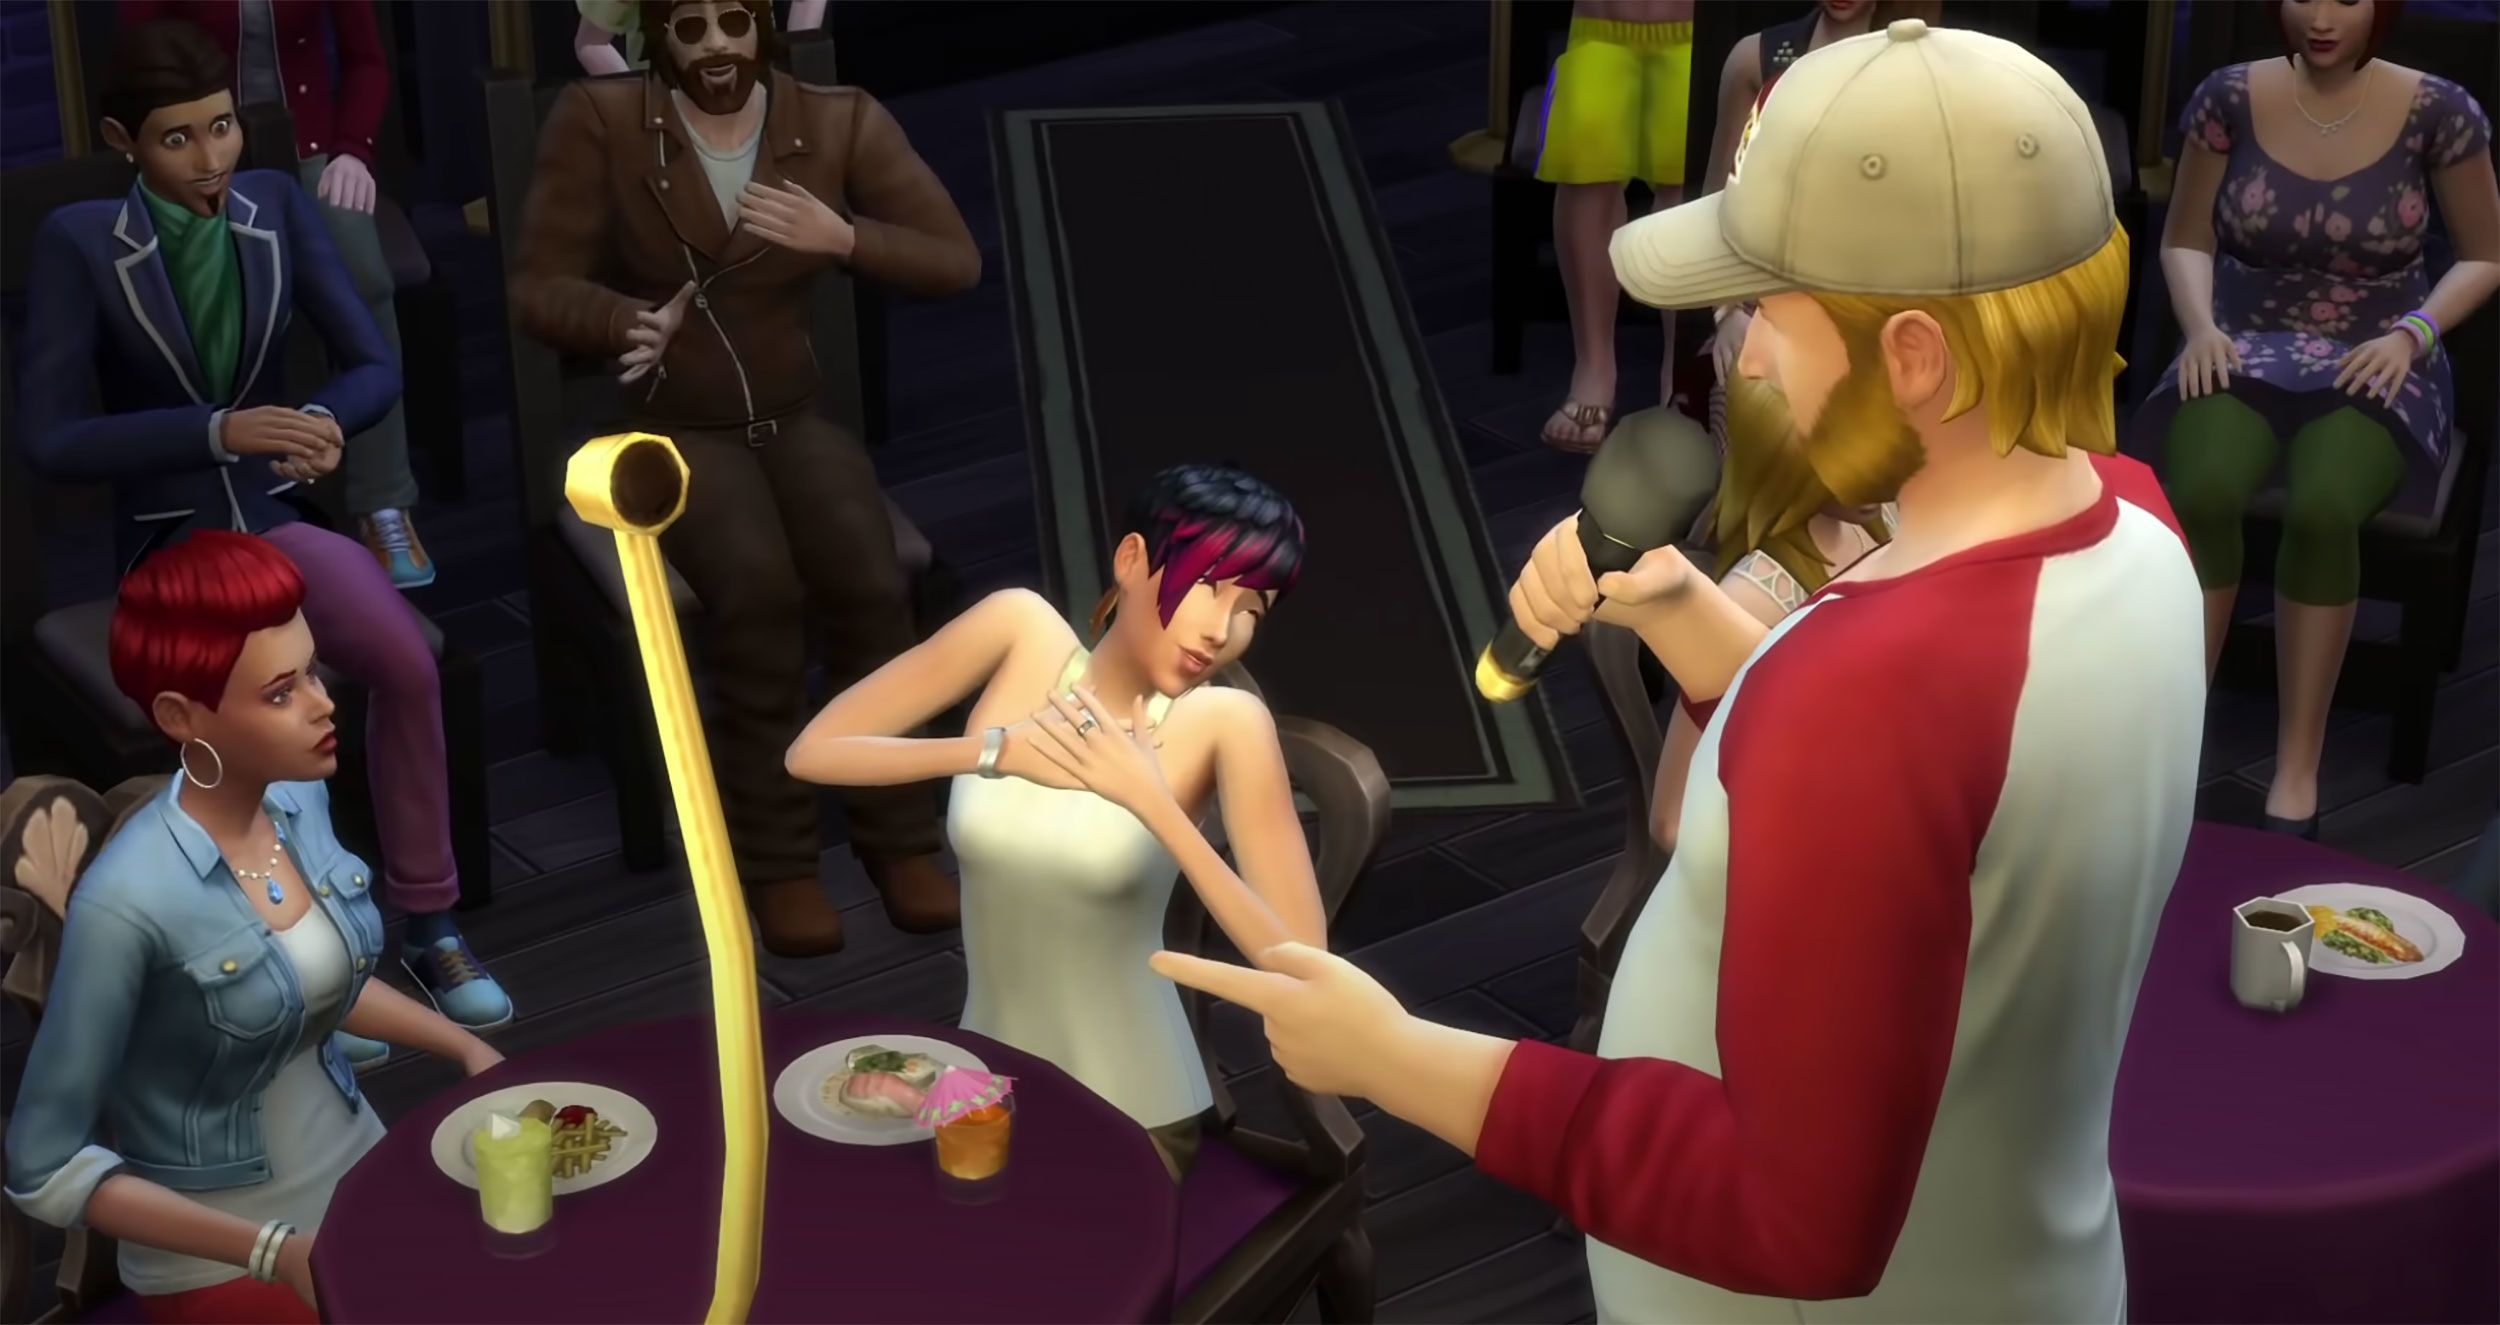 The Sims 4 wants and fears explained